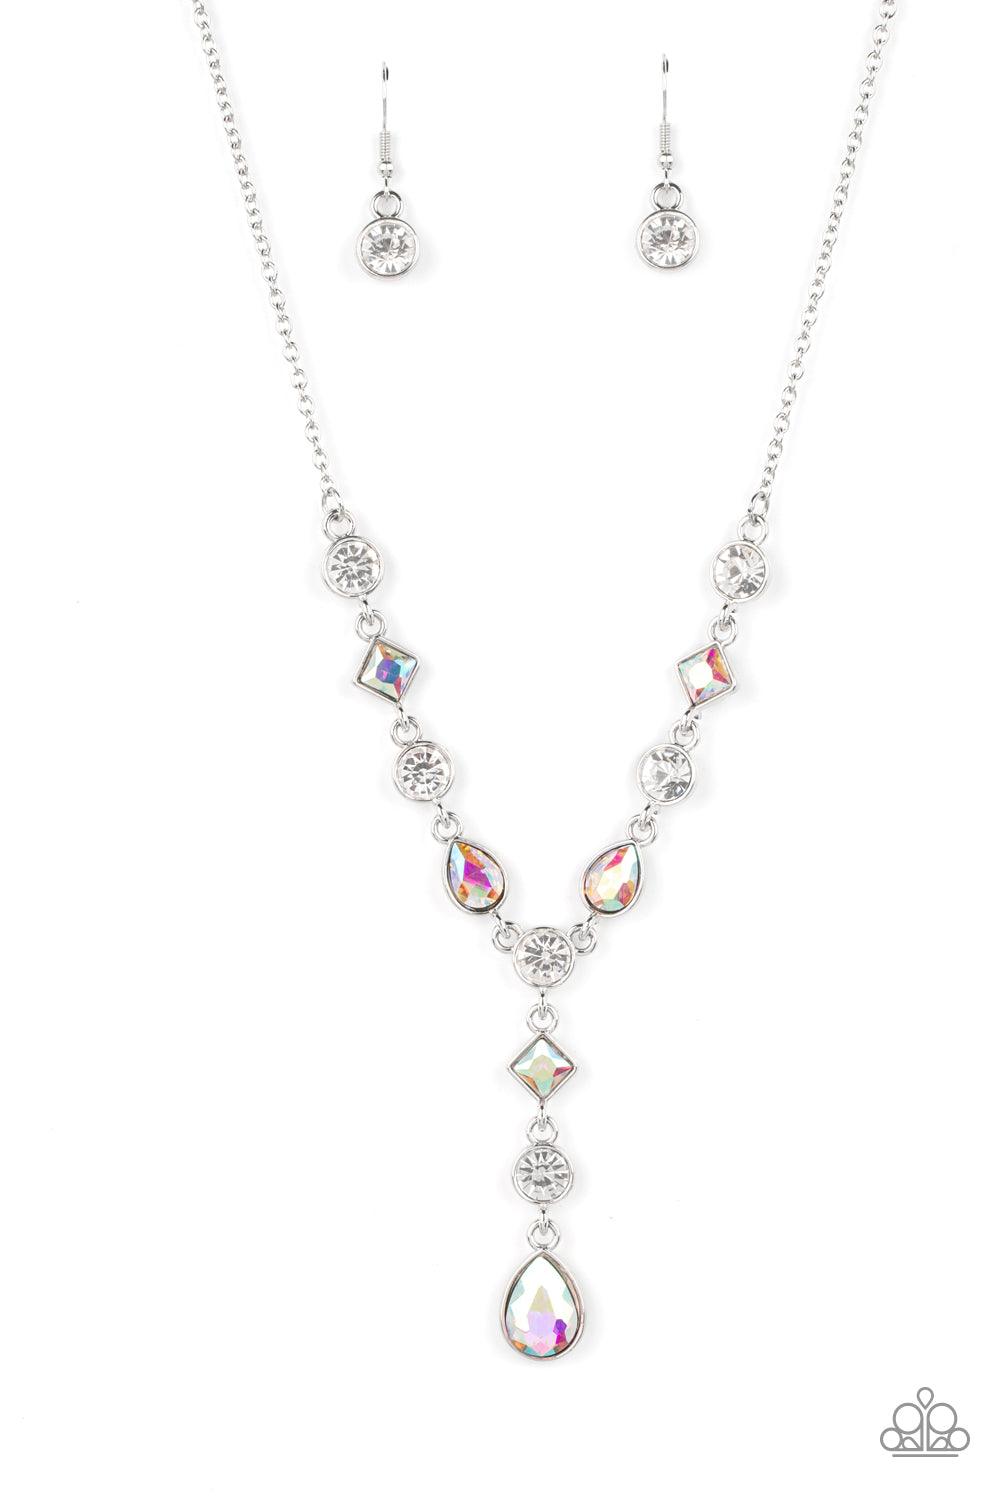 Bedazzled Bliss Multi Necklace - Jewelry by Bretta